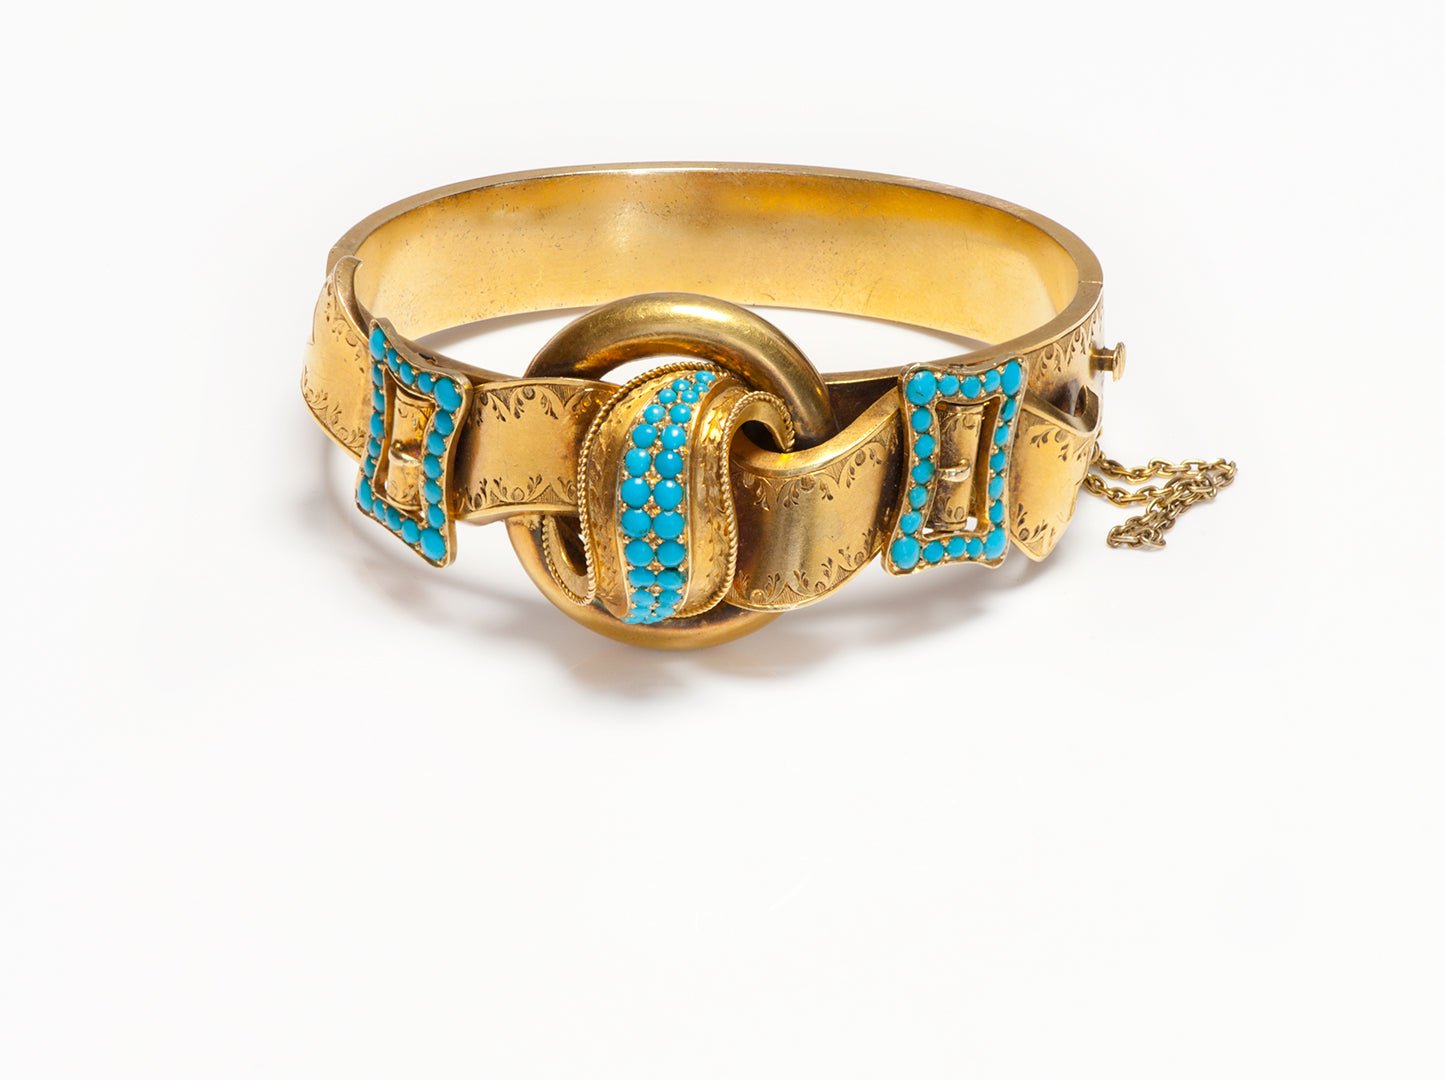 Antique Victorian Gold Turquoise Buckle Bangle Bracelet - DSF Antique Jewelry